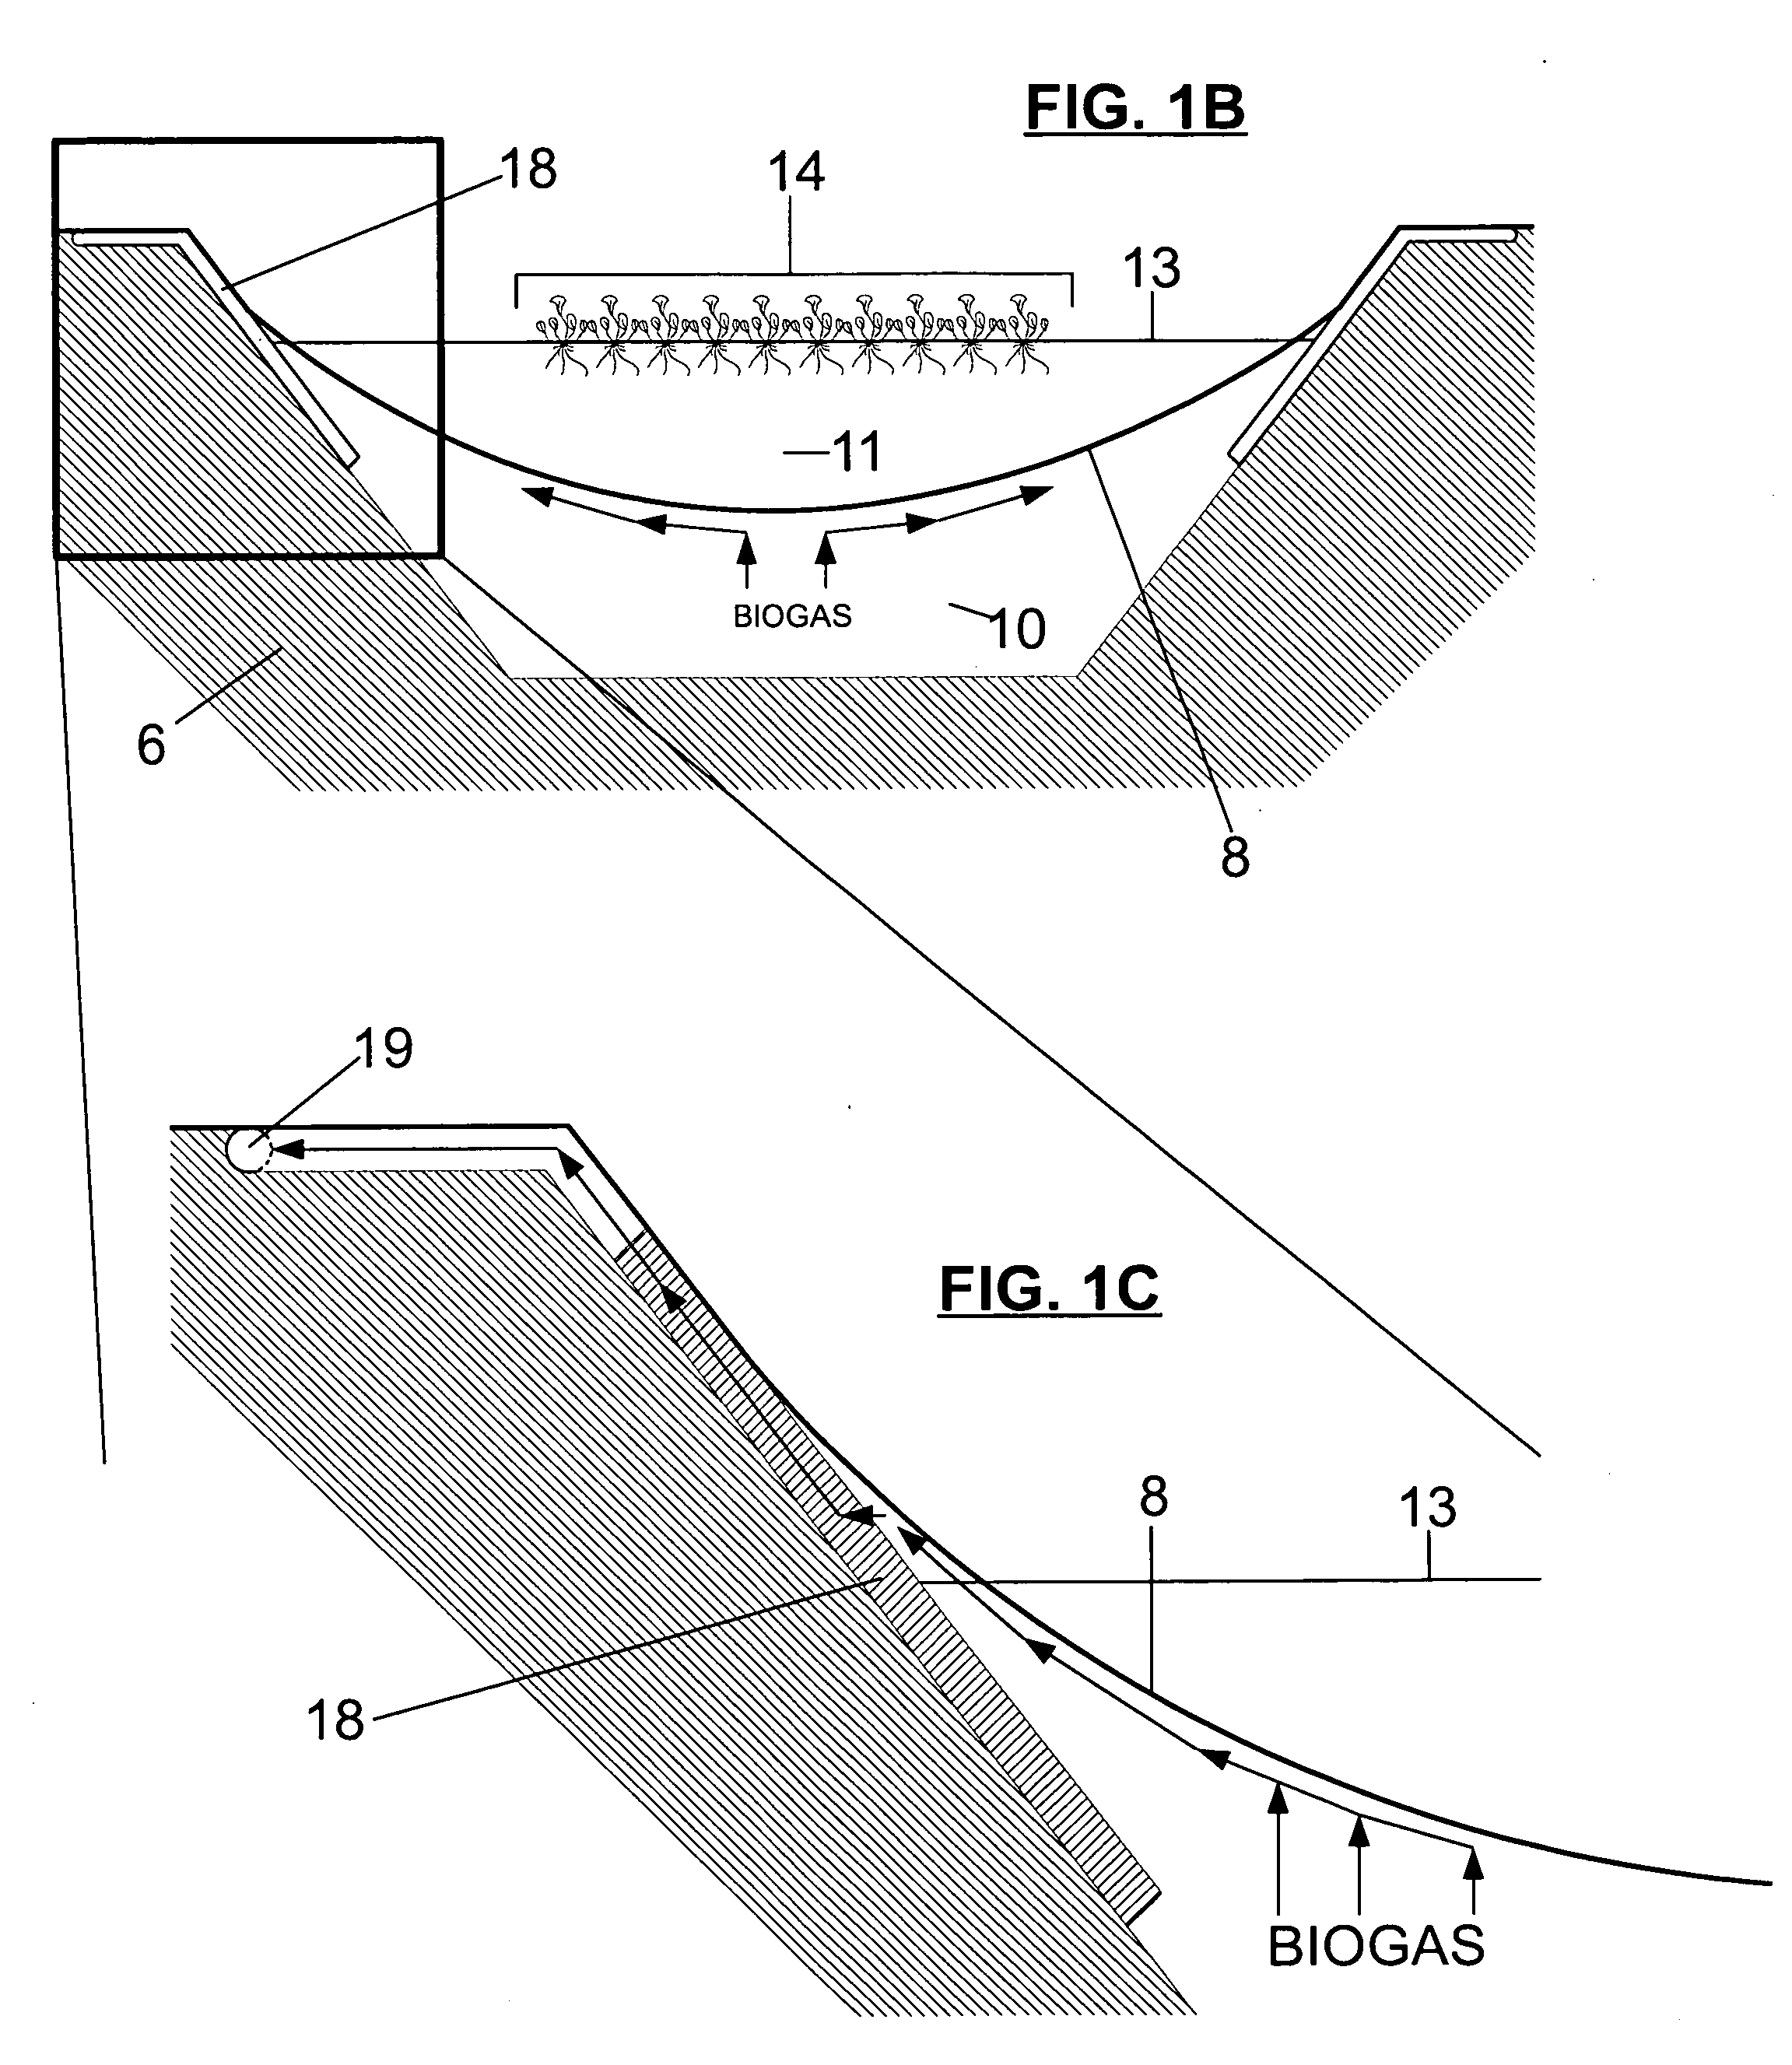 Apparatus and Method for Agricultural Animal Wastewater Treatment